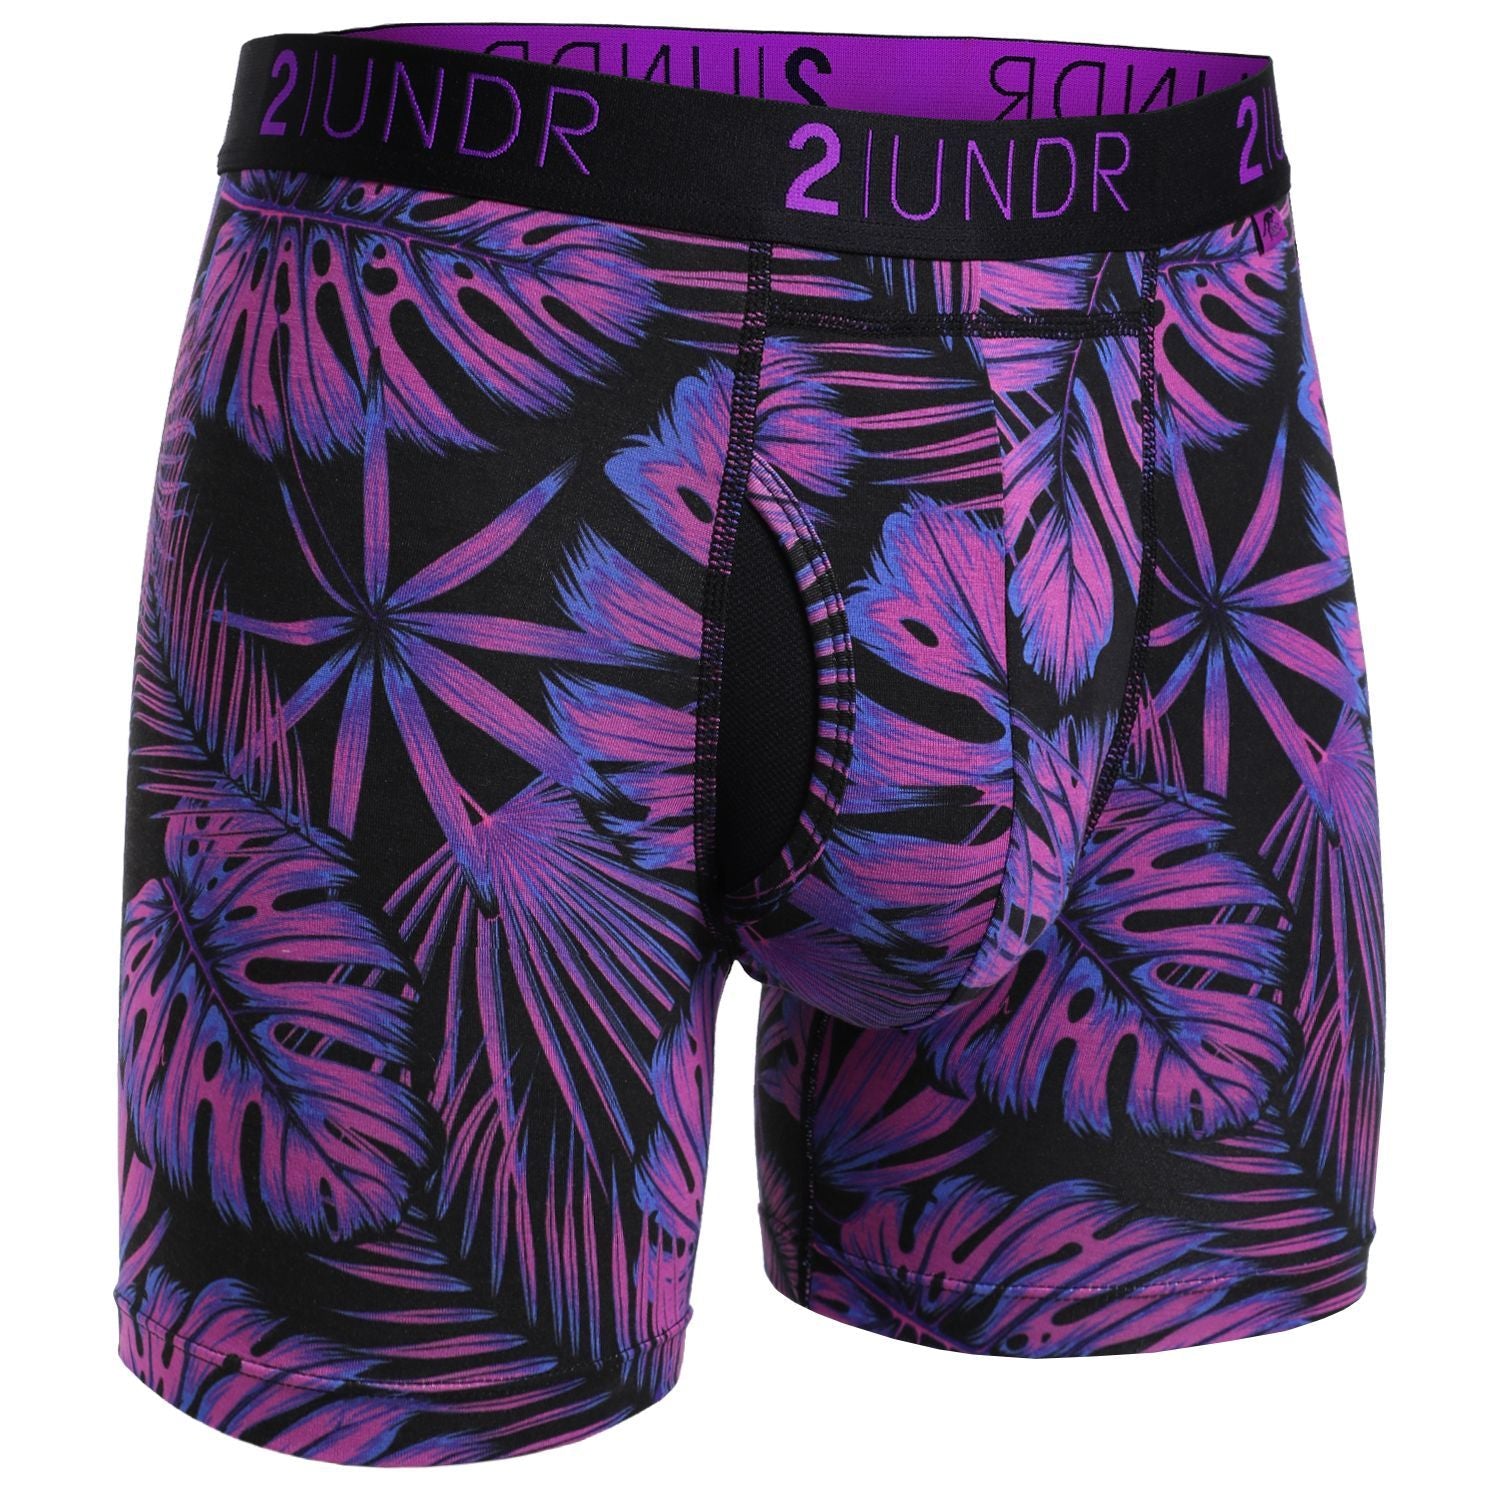 2UNDR - Printed Swing Shift Boxer Ultra Violet  Men's Sustainable Underwear  – All Things Being Eco